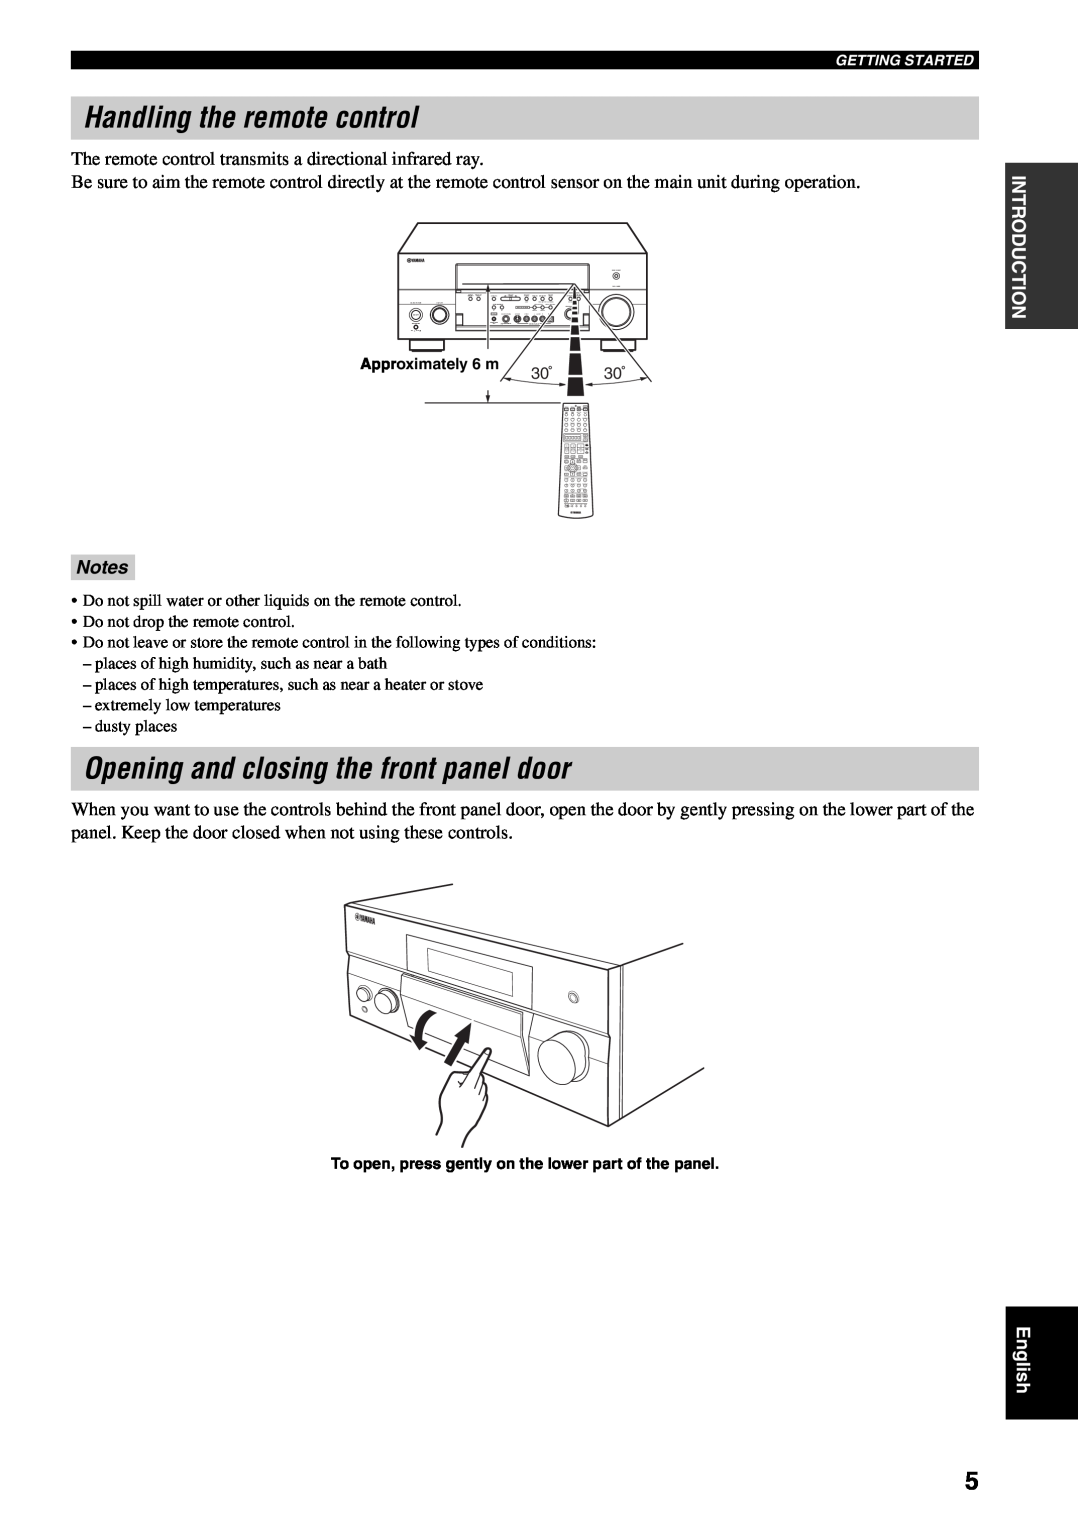 Yamaha RX-V1600 owner manual Handling the remote control, Opening and closing the front panel door, Notes 